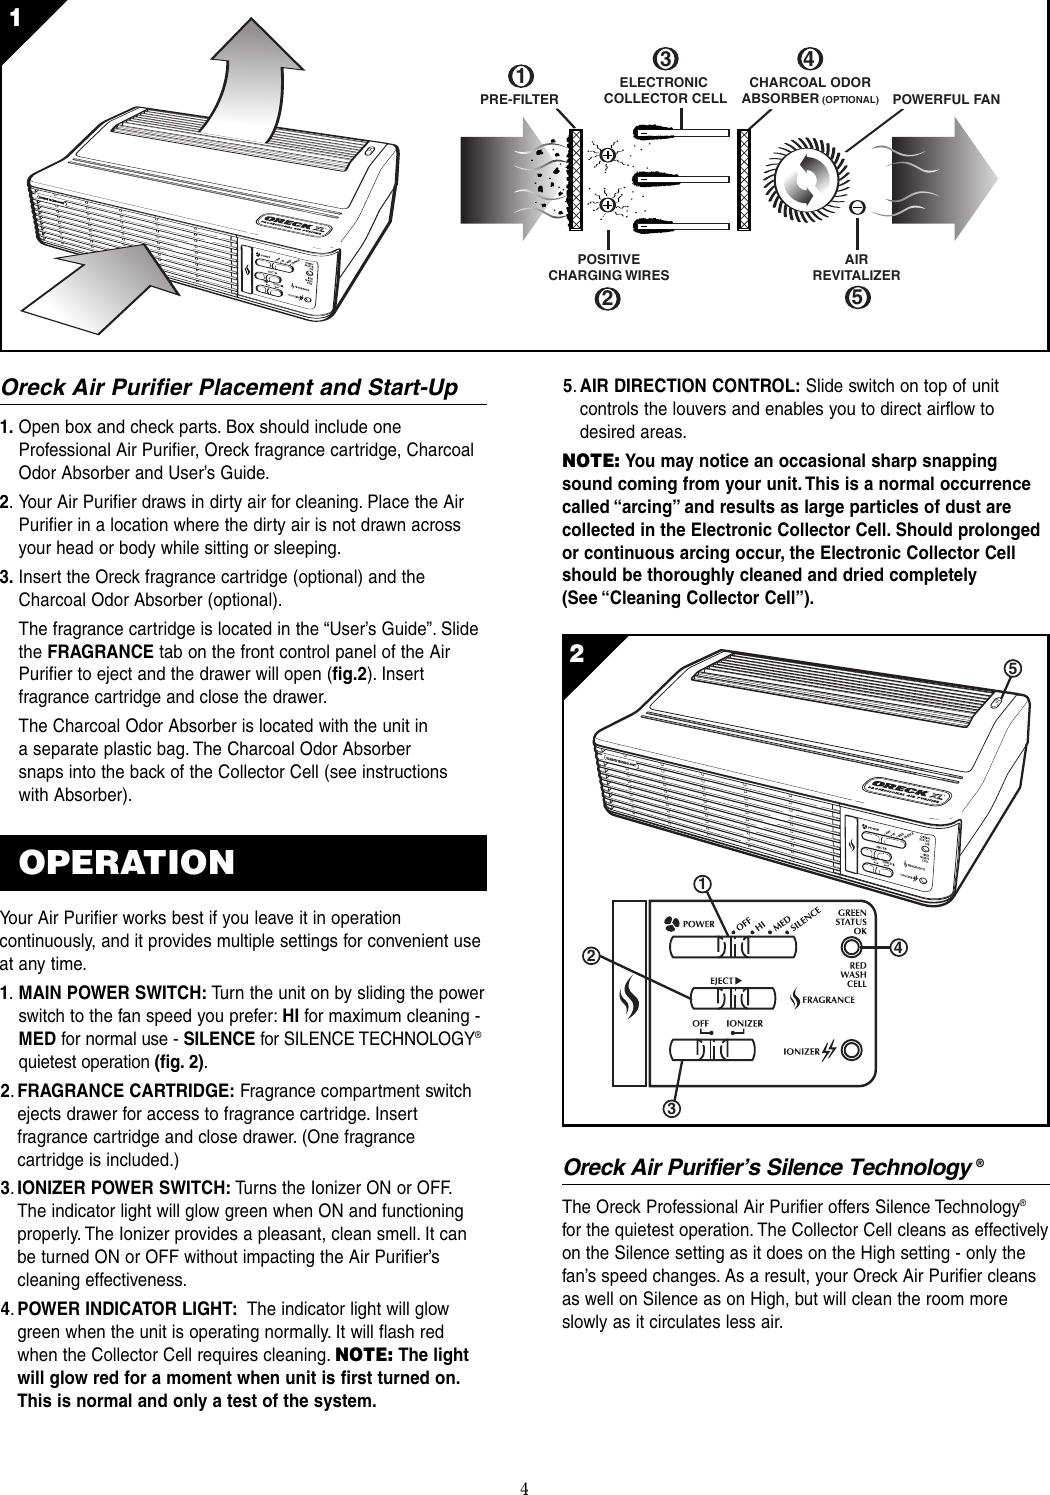 Page 6 of 12 - Oreck Oreck-3323-8889Revk-Users-Manual- Air 8 Manual Rev B  Oreck-3323-8889revk-users-manual